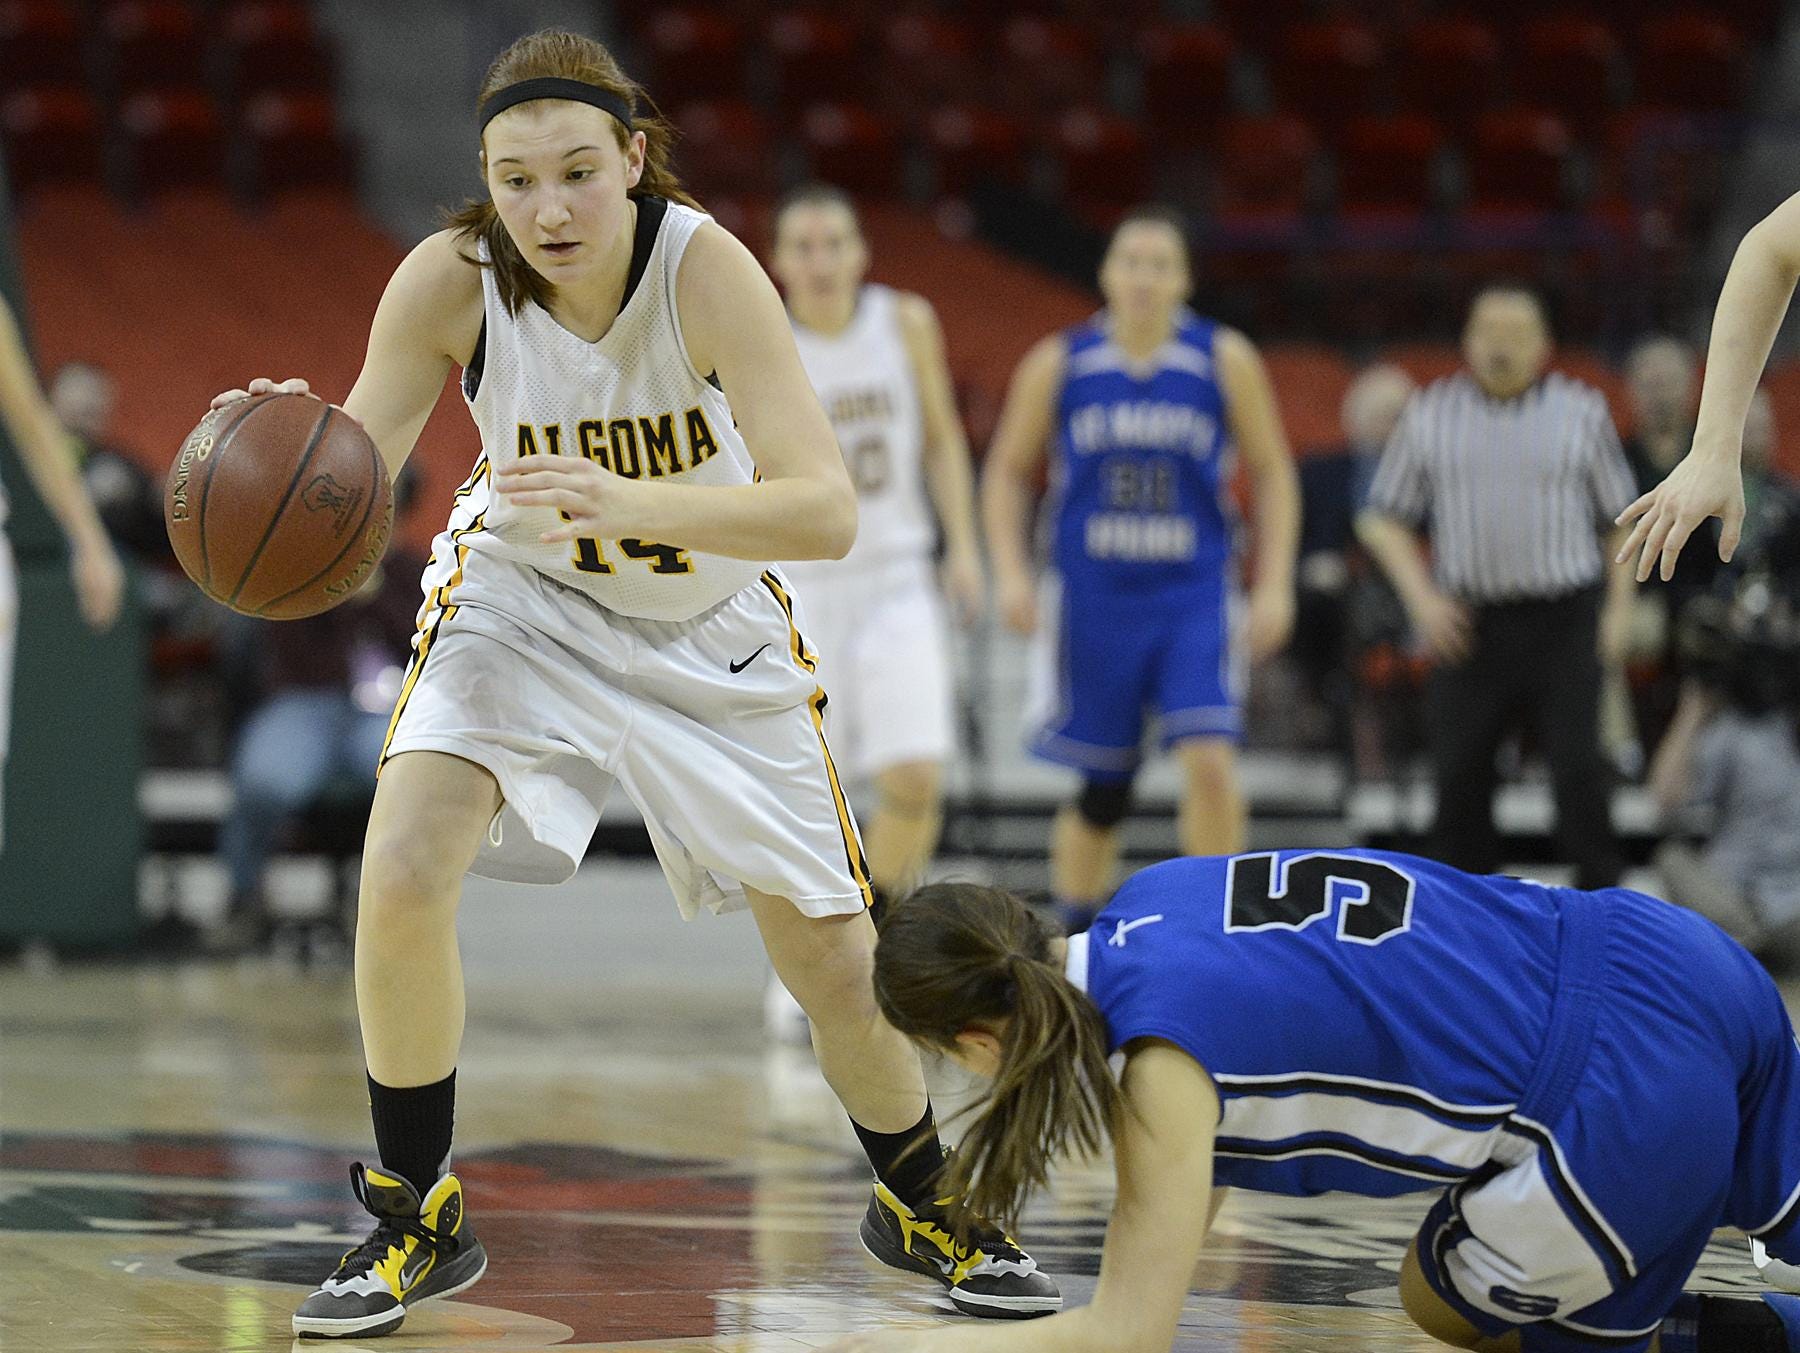 Algoma senior guard Baleigh Delorit helped her team make back-to-back WIAA Division 4 state championship game appearances at the Resch Center as a freshman and sophomore.